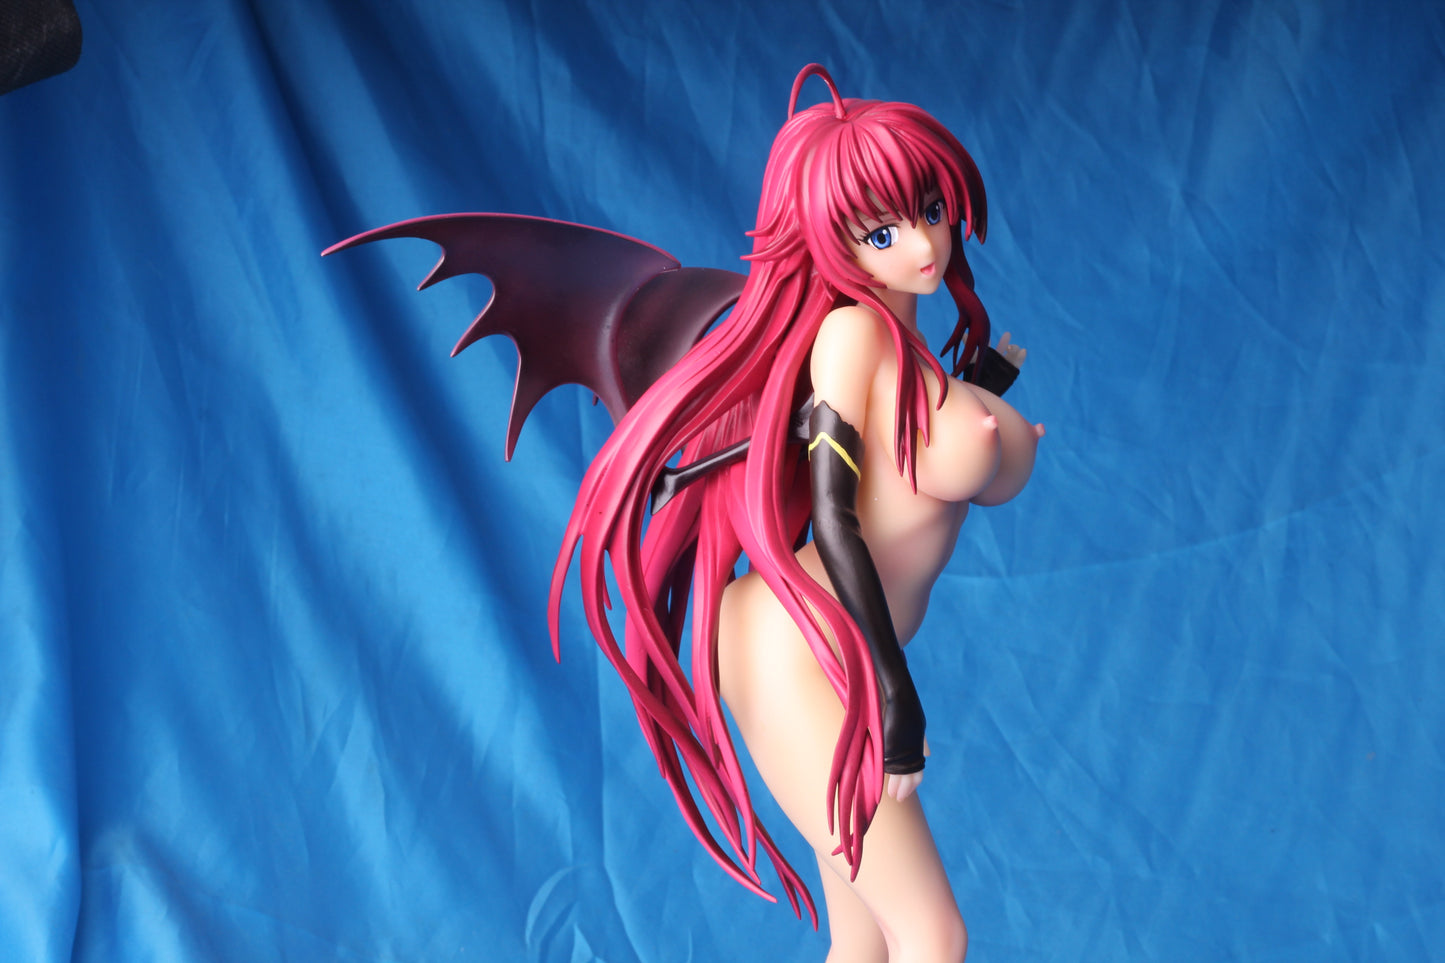 Japanese anime High School DxD Rias Gremory 1/4 naked anime figure sexy resin figure girl